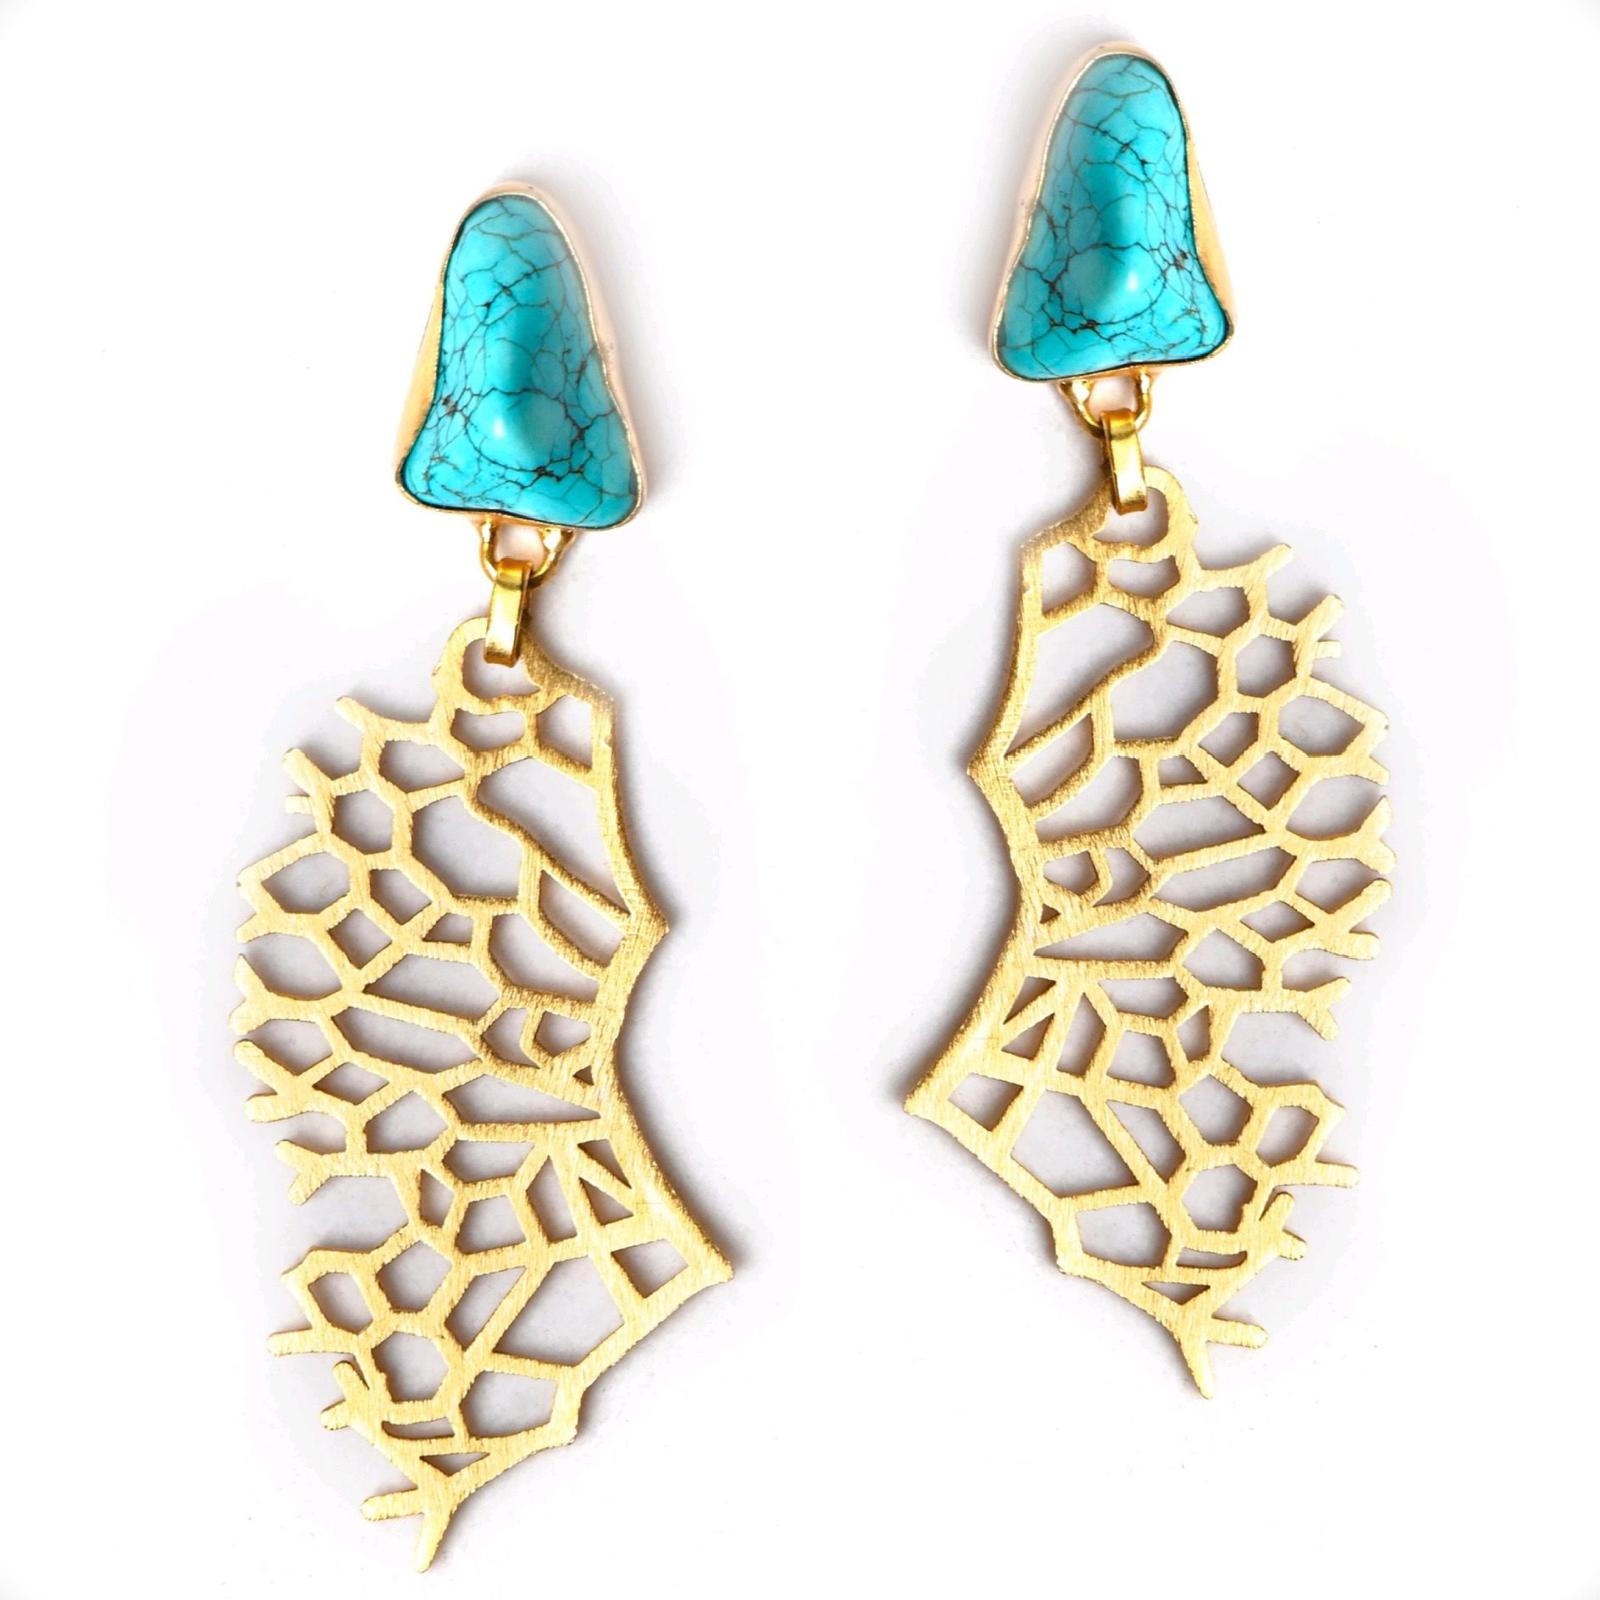 Coral (Turquoise) Statement Earrings